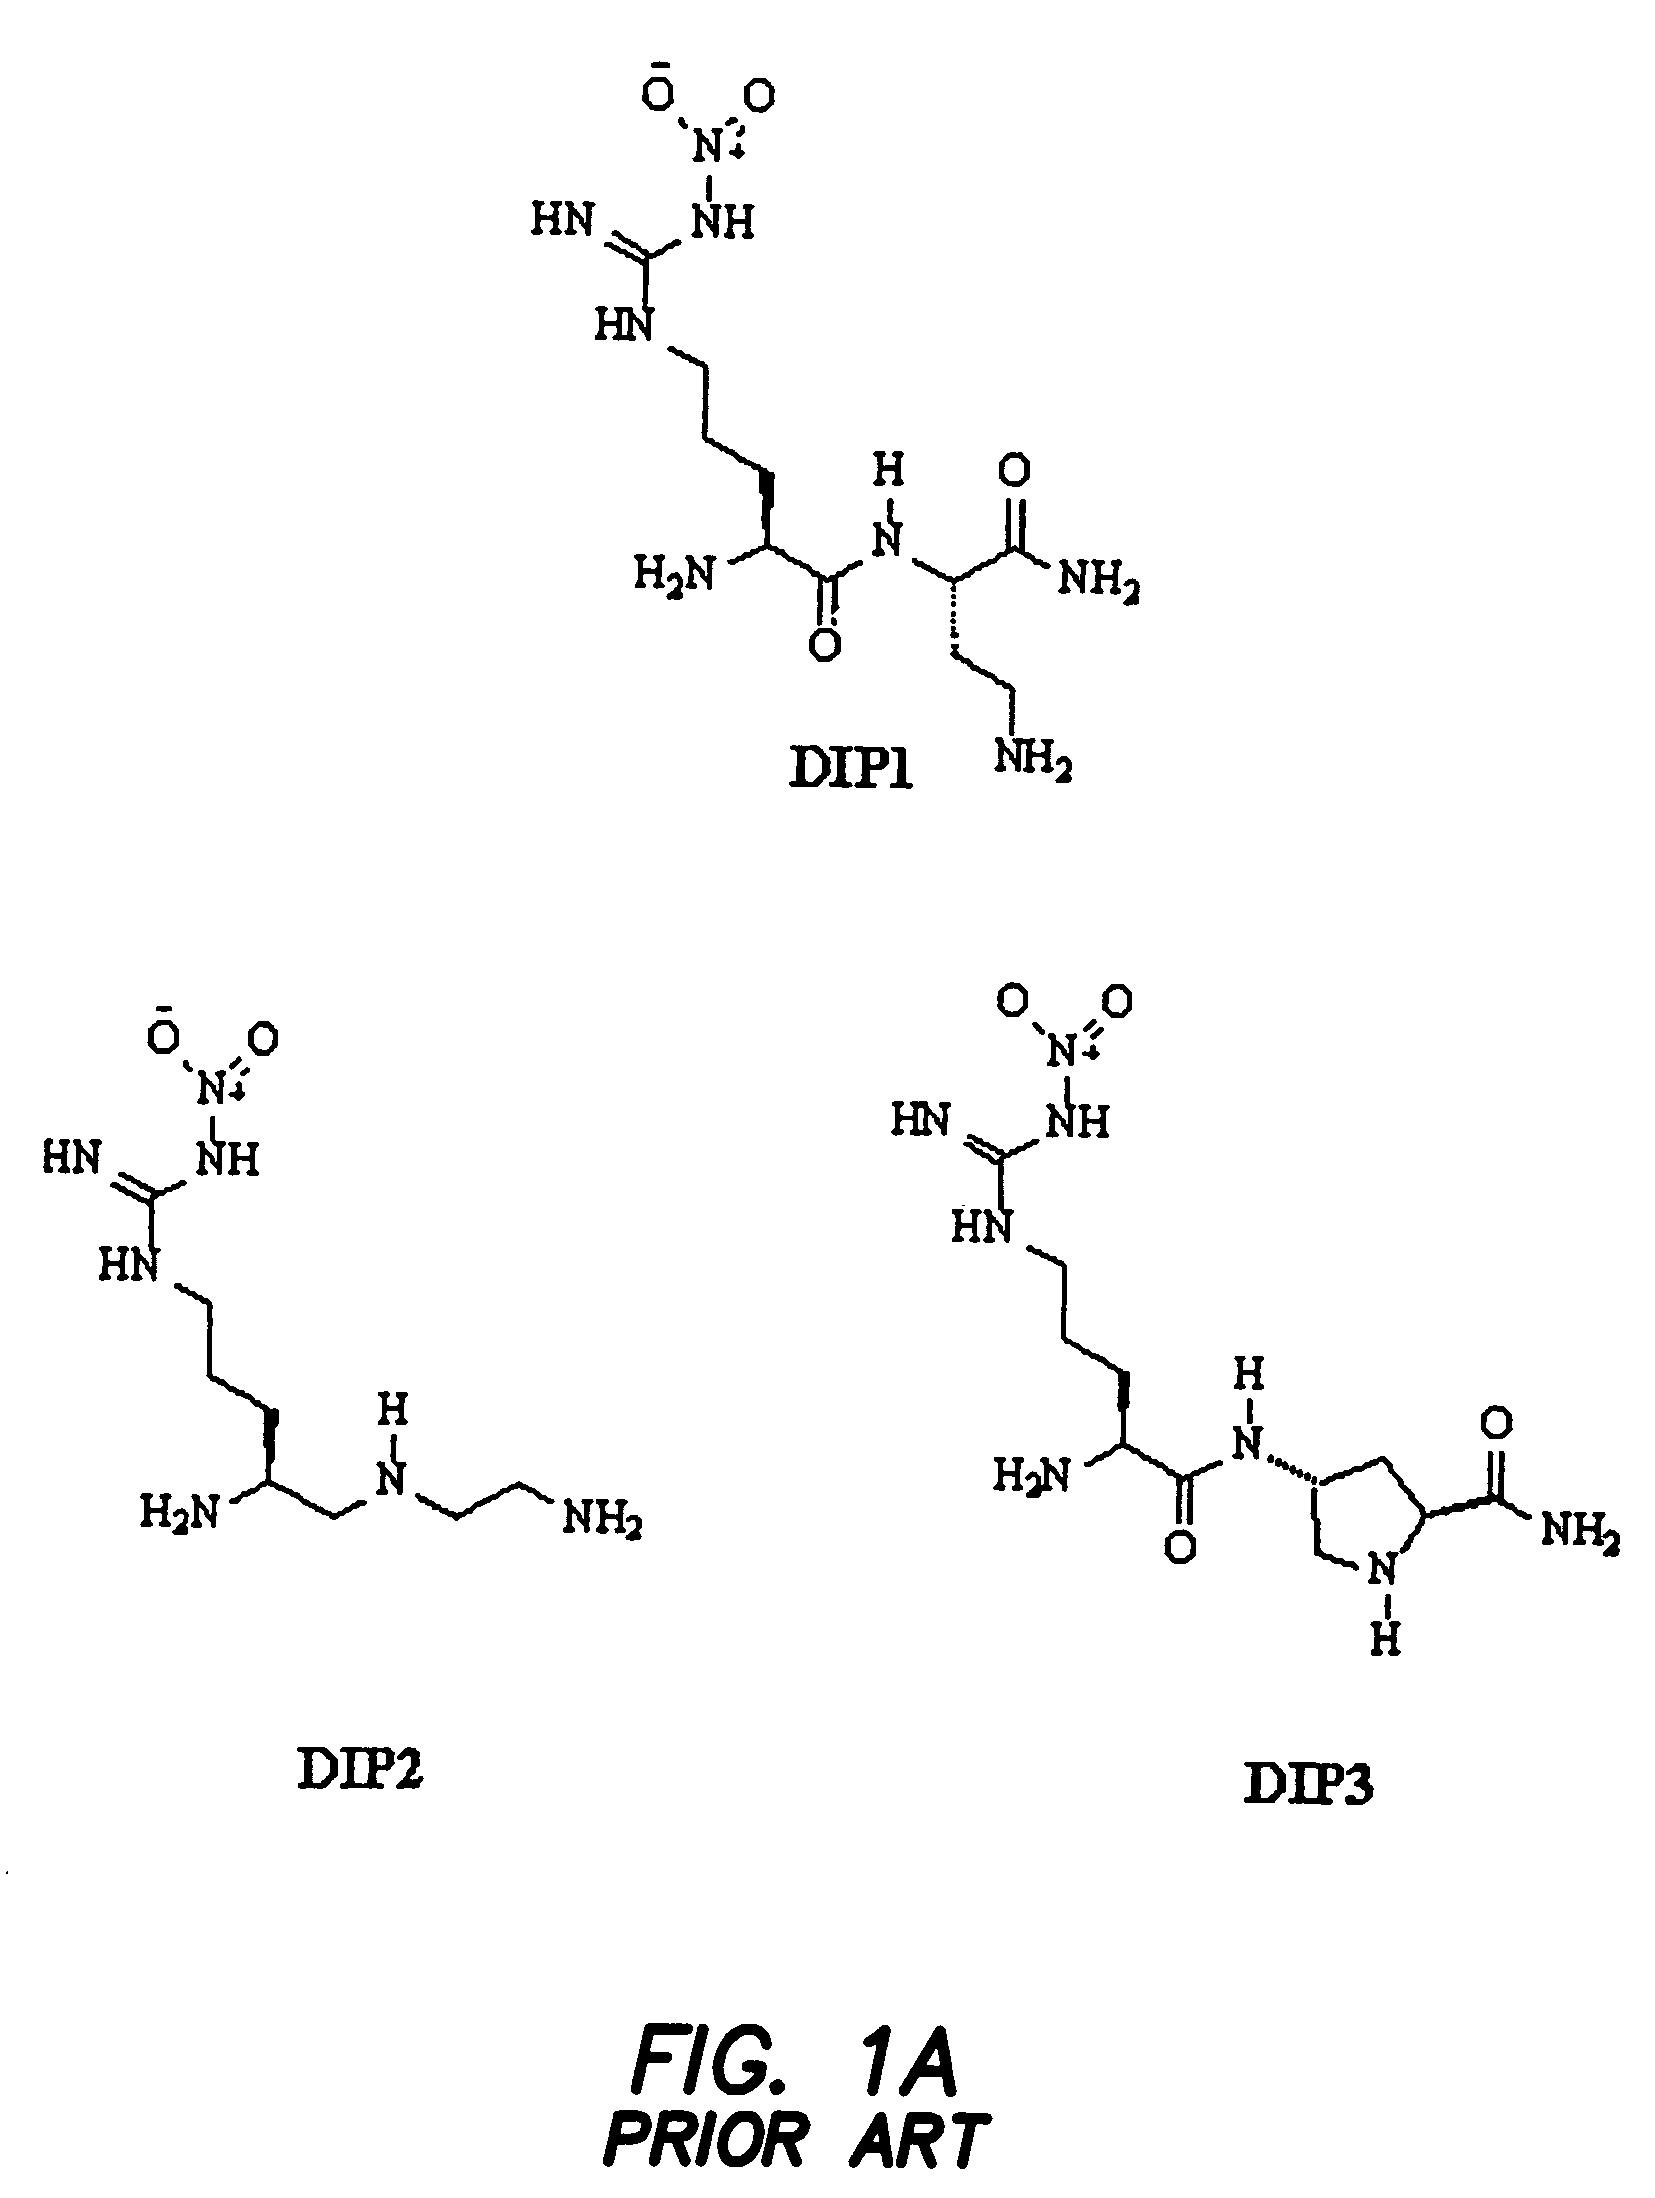 Selective inhibition of neuronal nitric oxide synthase